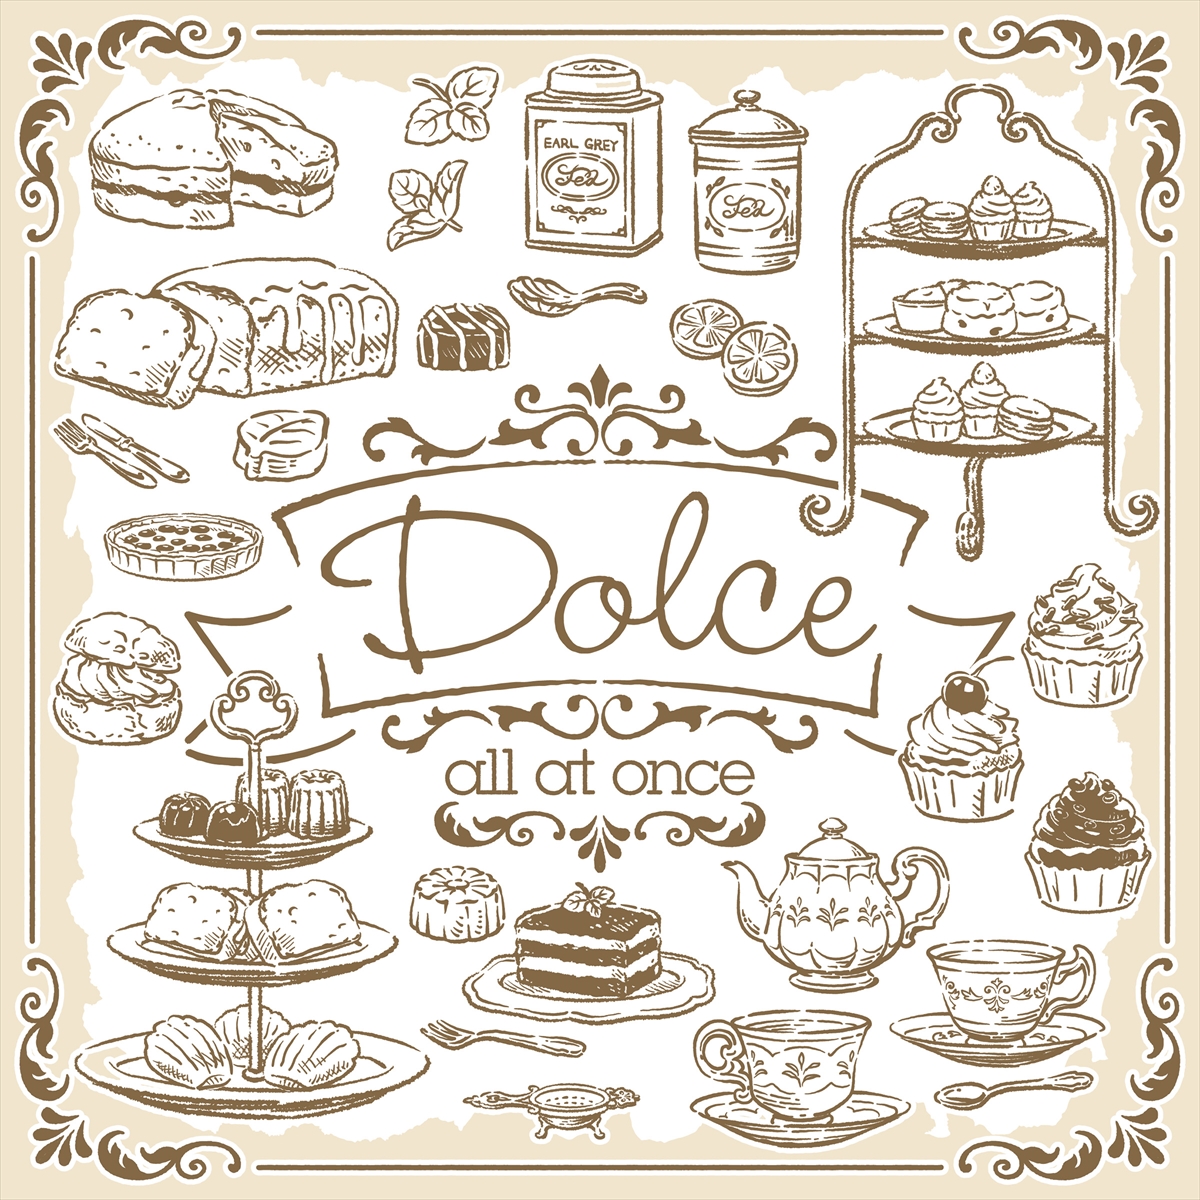 all at once「Dolce」